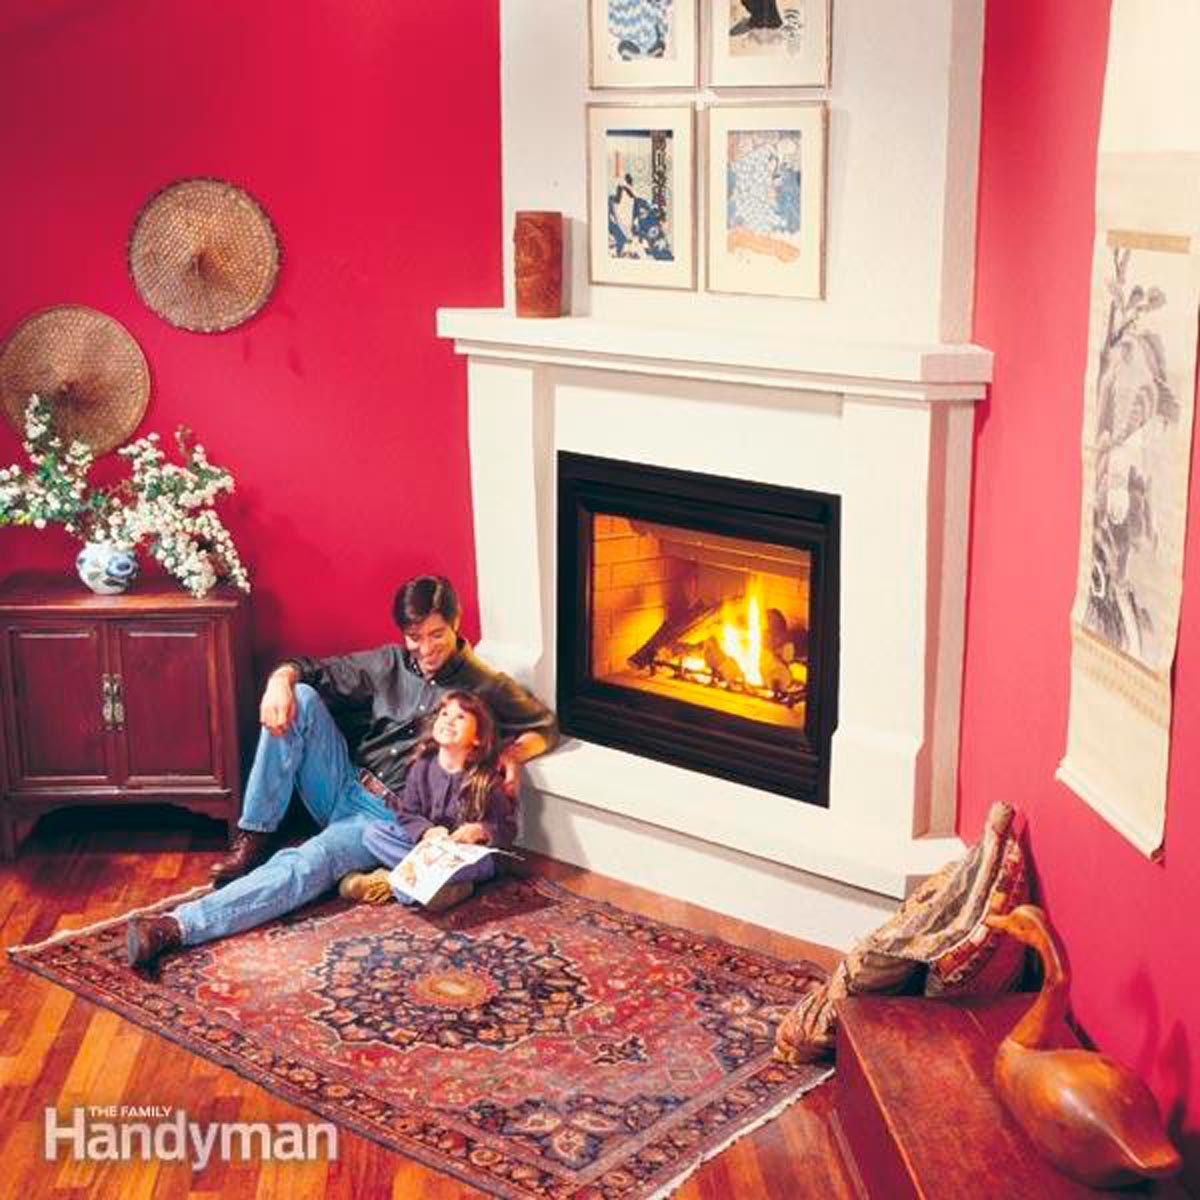 How To Install A Gas Fireplace Diy, Built In Gas Fireplace Installation